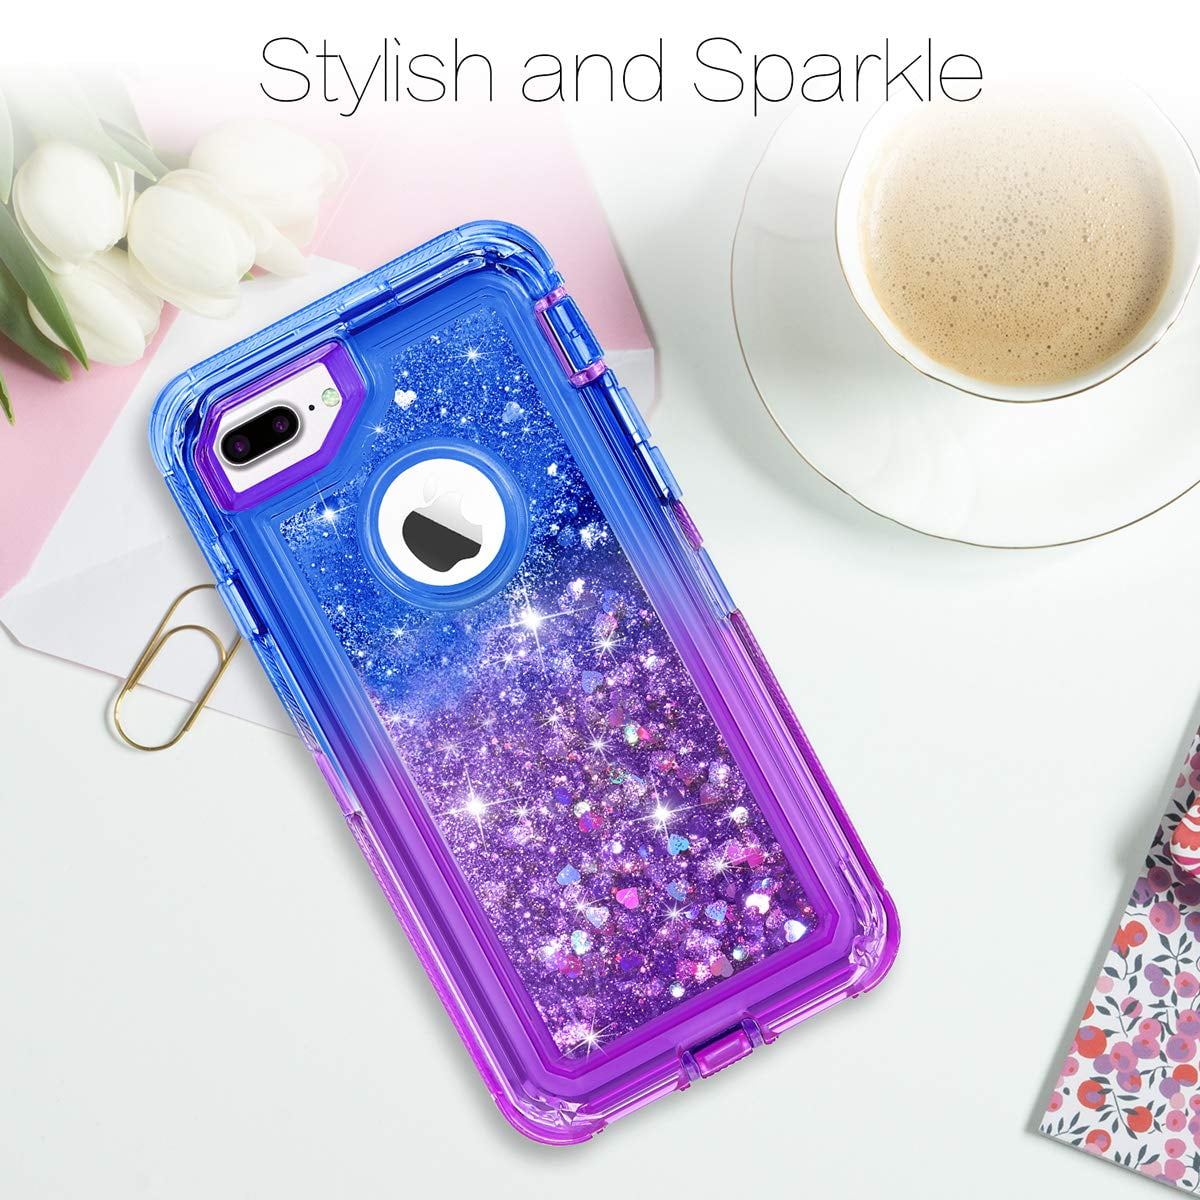 6/6S Plus / iPhone Cover - Wireless Sparkling Case Plus 7 Apple Plus / for iPhone 8 Silicone iPhone Modes